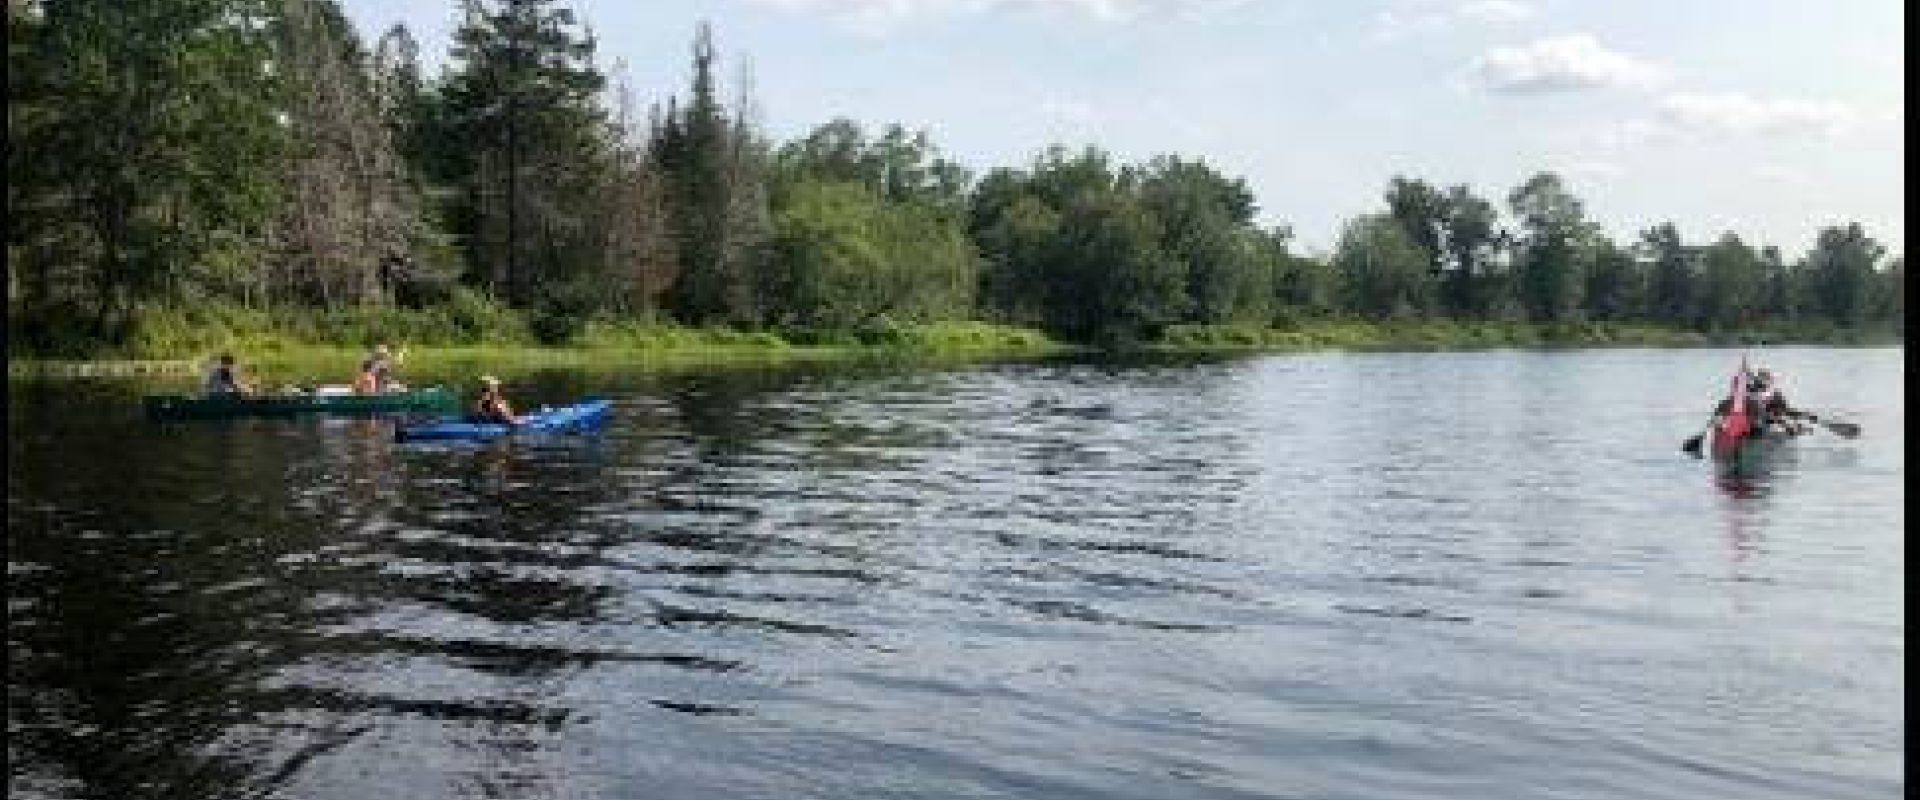 Canoers and kayakers paddle calm waters of the St. Croix River with green trees along the far shore.